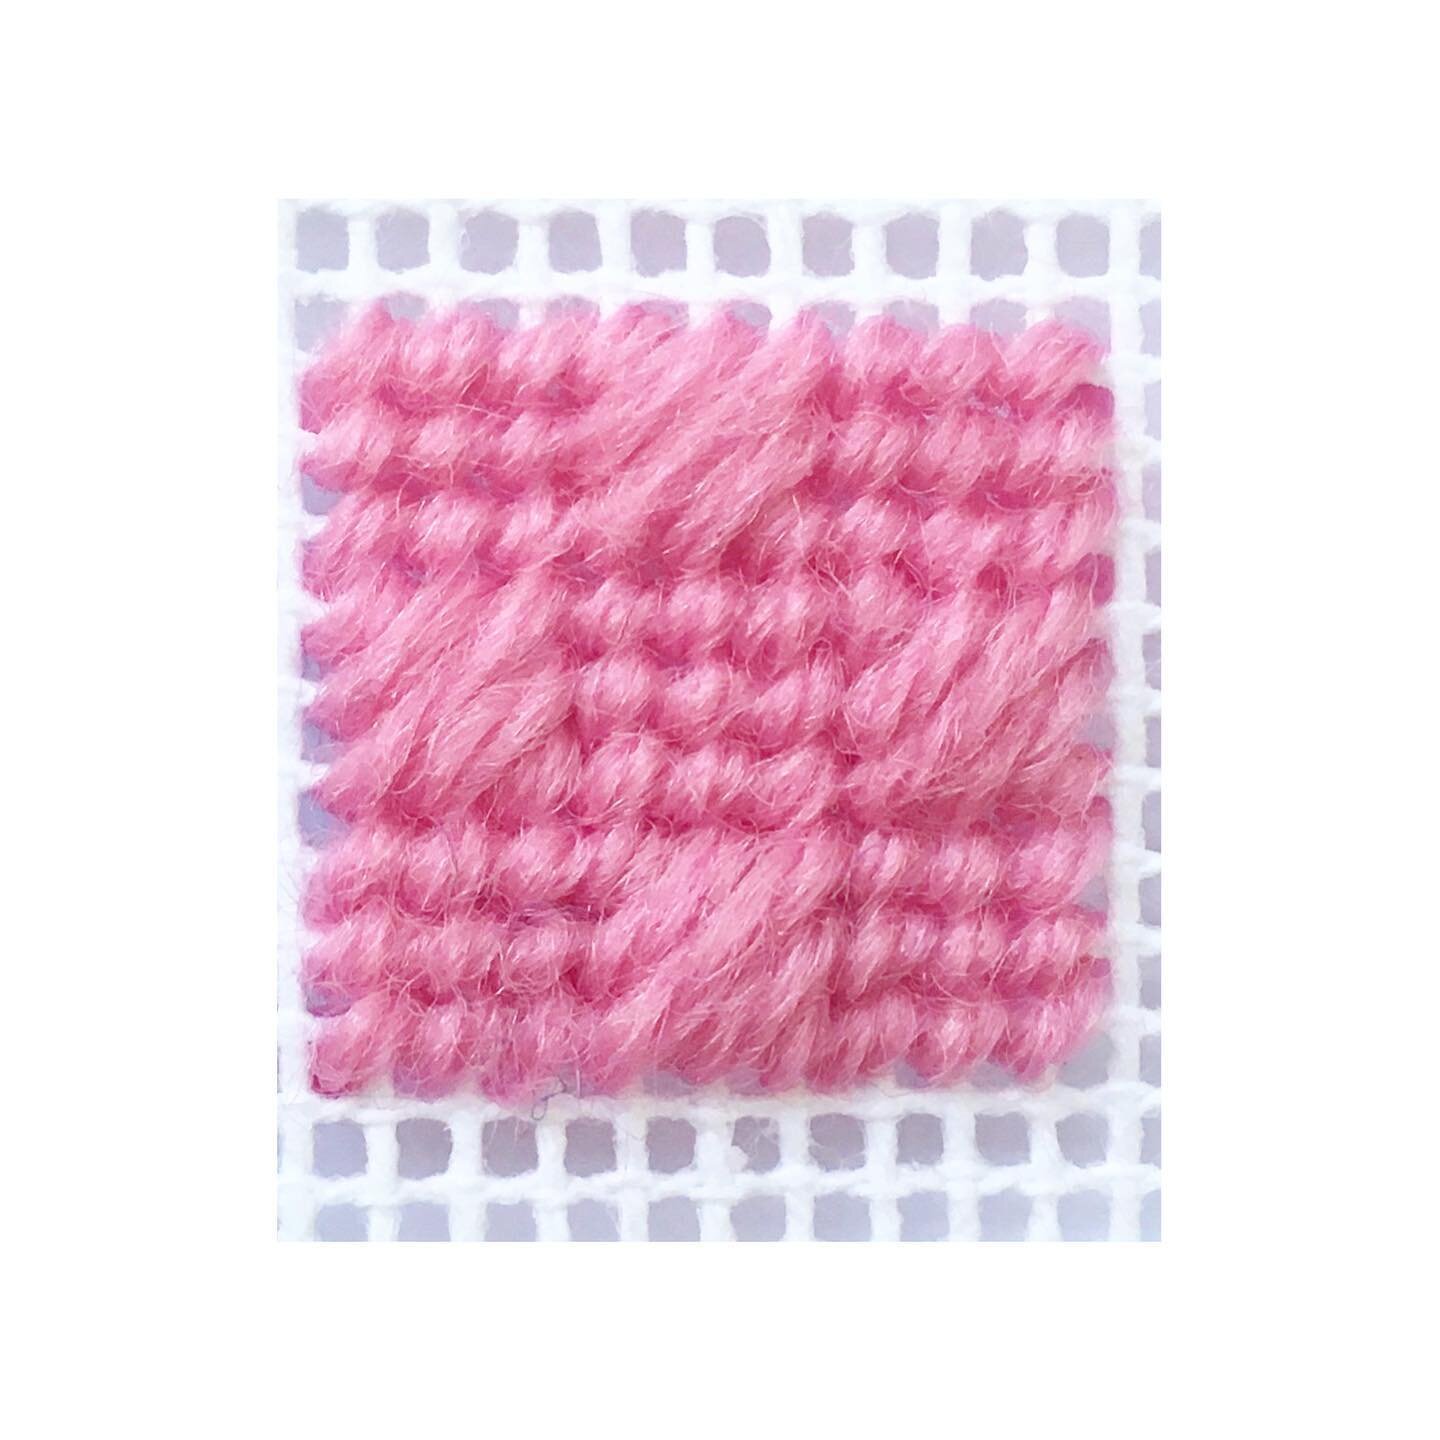 Stitch Monday! (But on a Thursday 🤣) 

With the @ourcommonthreadco  launch on Monday I didn&rsquo;t have time to share a stitch with you but I couldn&rsquo;t let a week go by without one. 

So here is the beautiful Chequer Stitch. The mix of texture